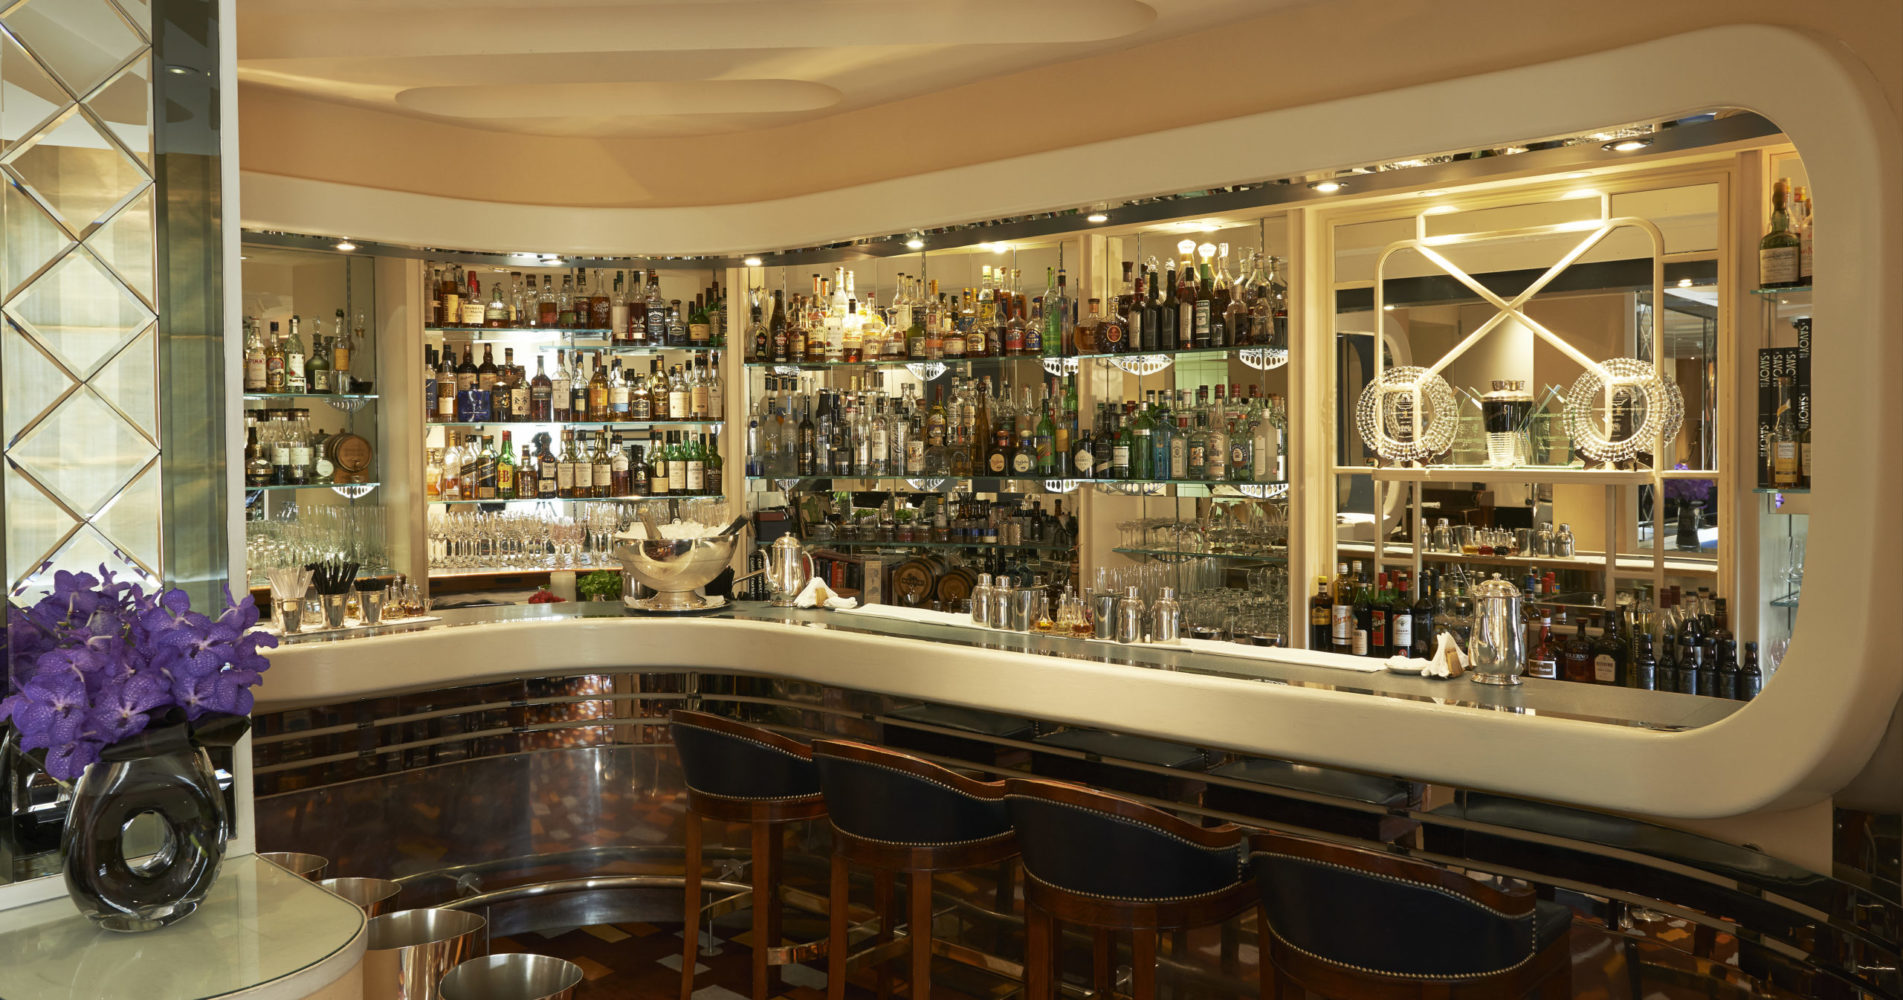 The American Bar at The Savoy